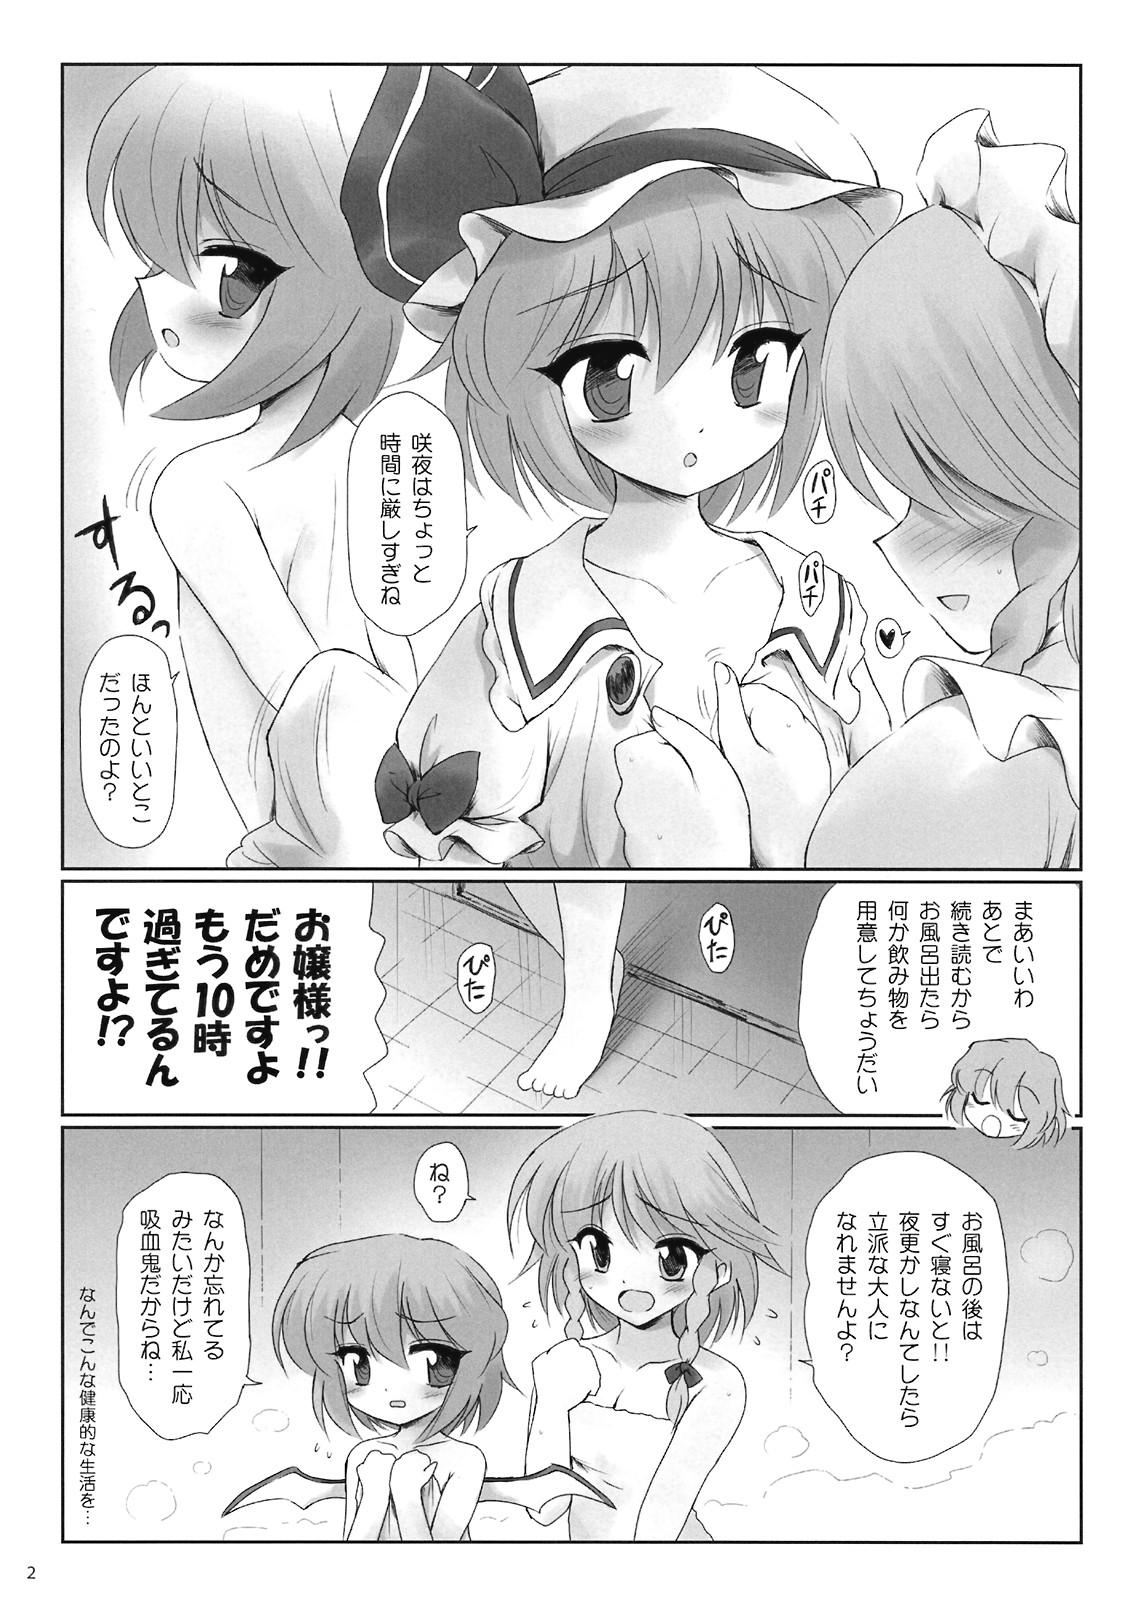 Dildo Fucking コピー本 - Touhou project Blackmail - Page 2